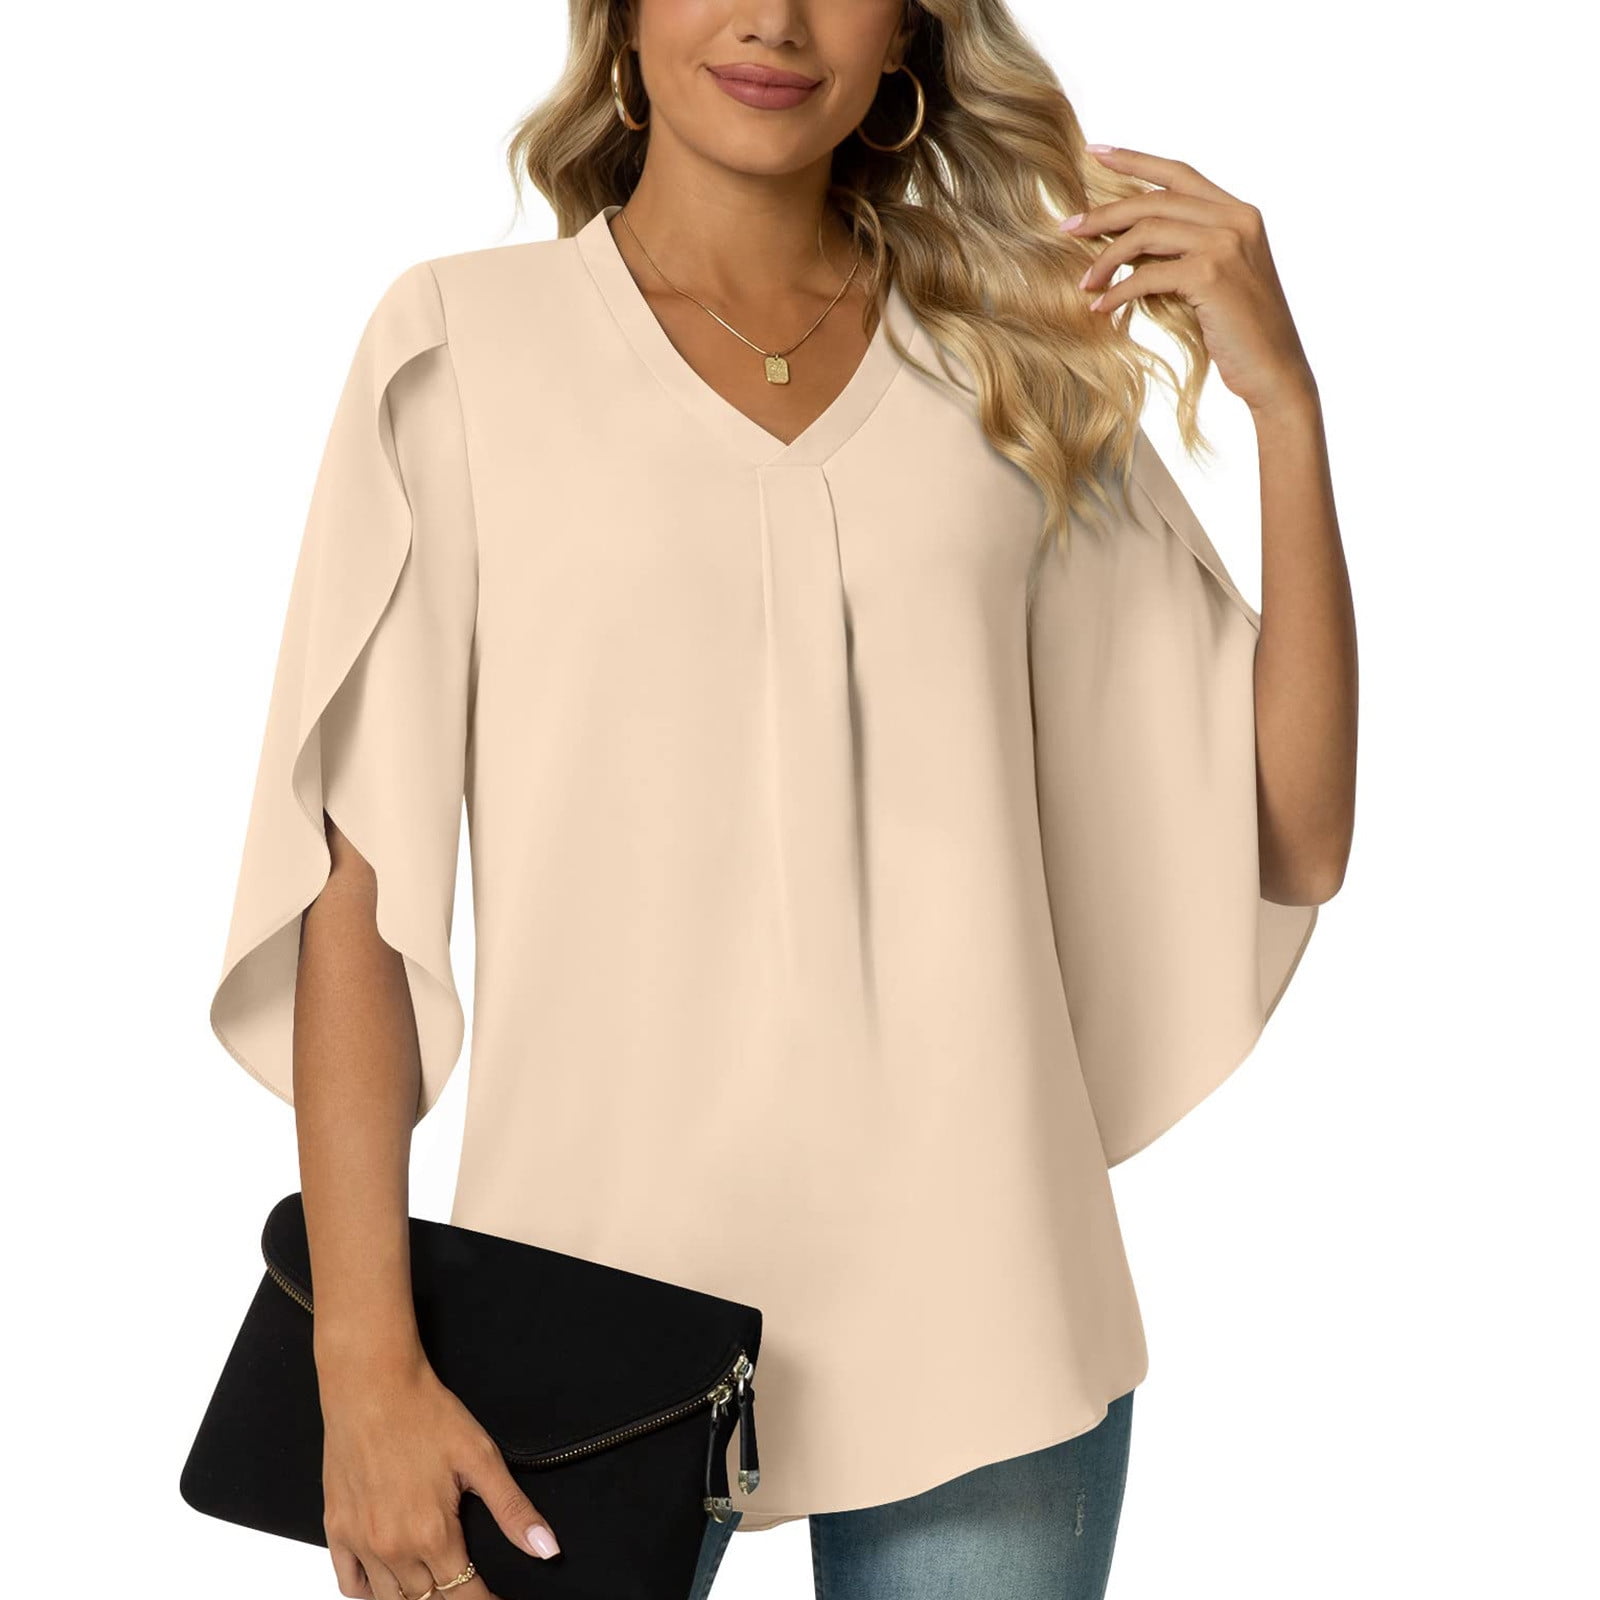 SELONE Plus Size Tops for Women Work Short Sleeve Tops Blouses